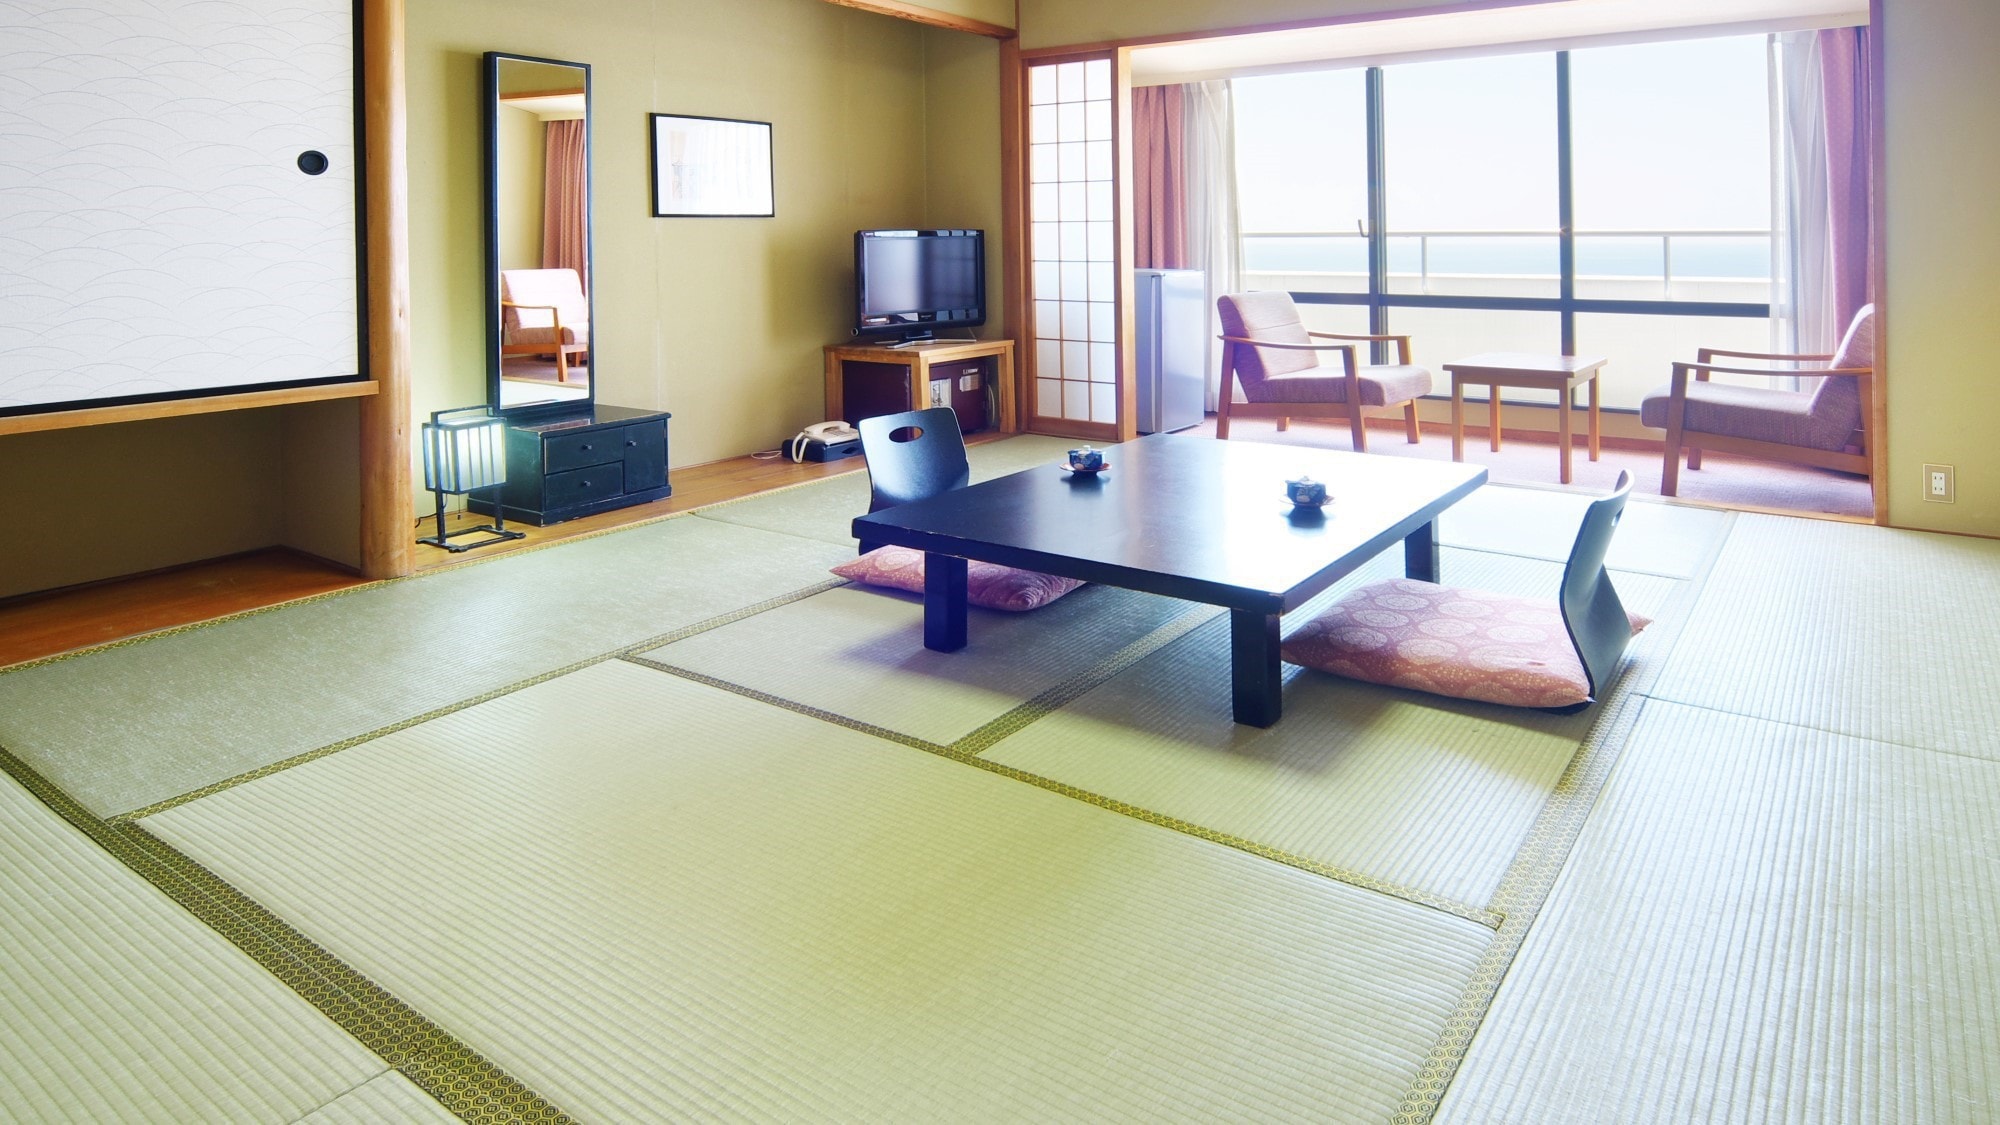 The Japanese-style room is 10 tatami mats in size and can accommodate up to 4 people.